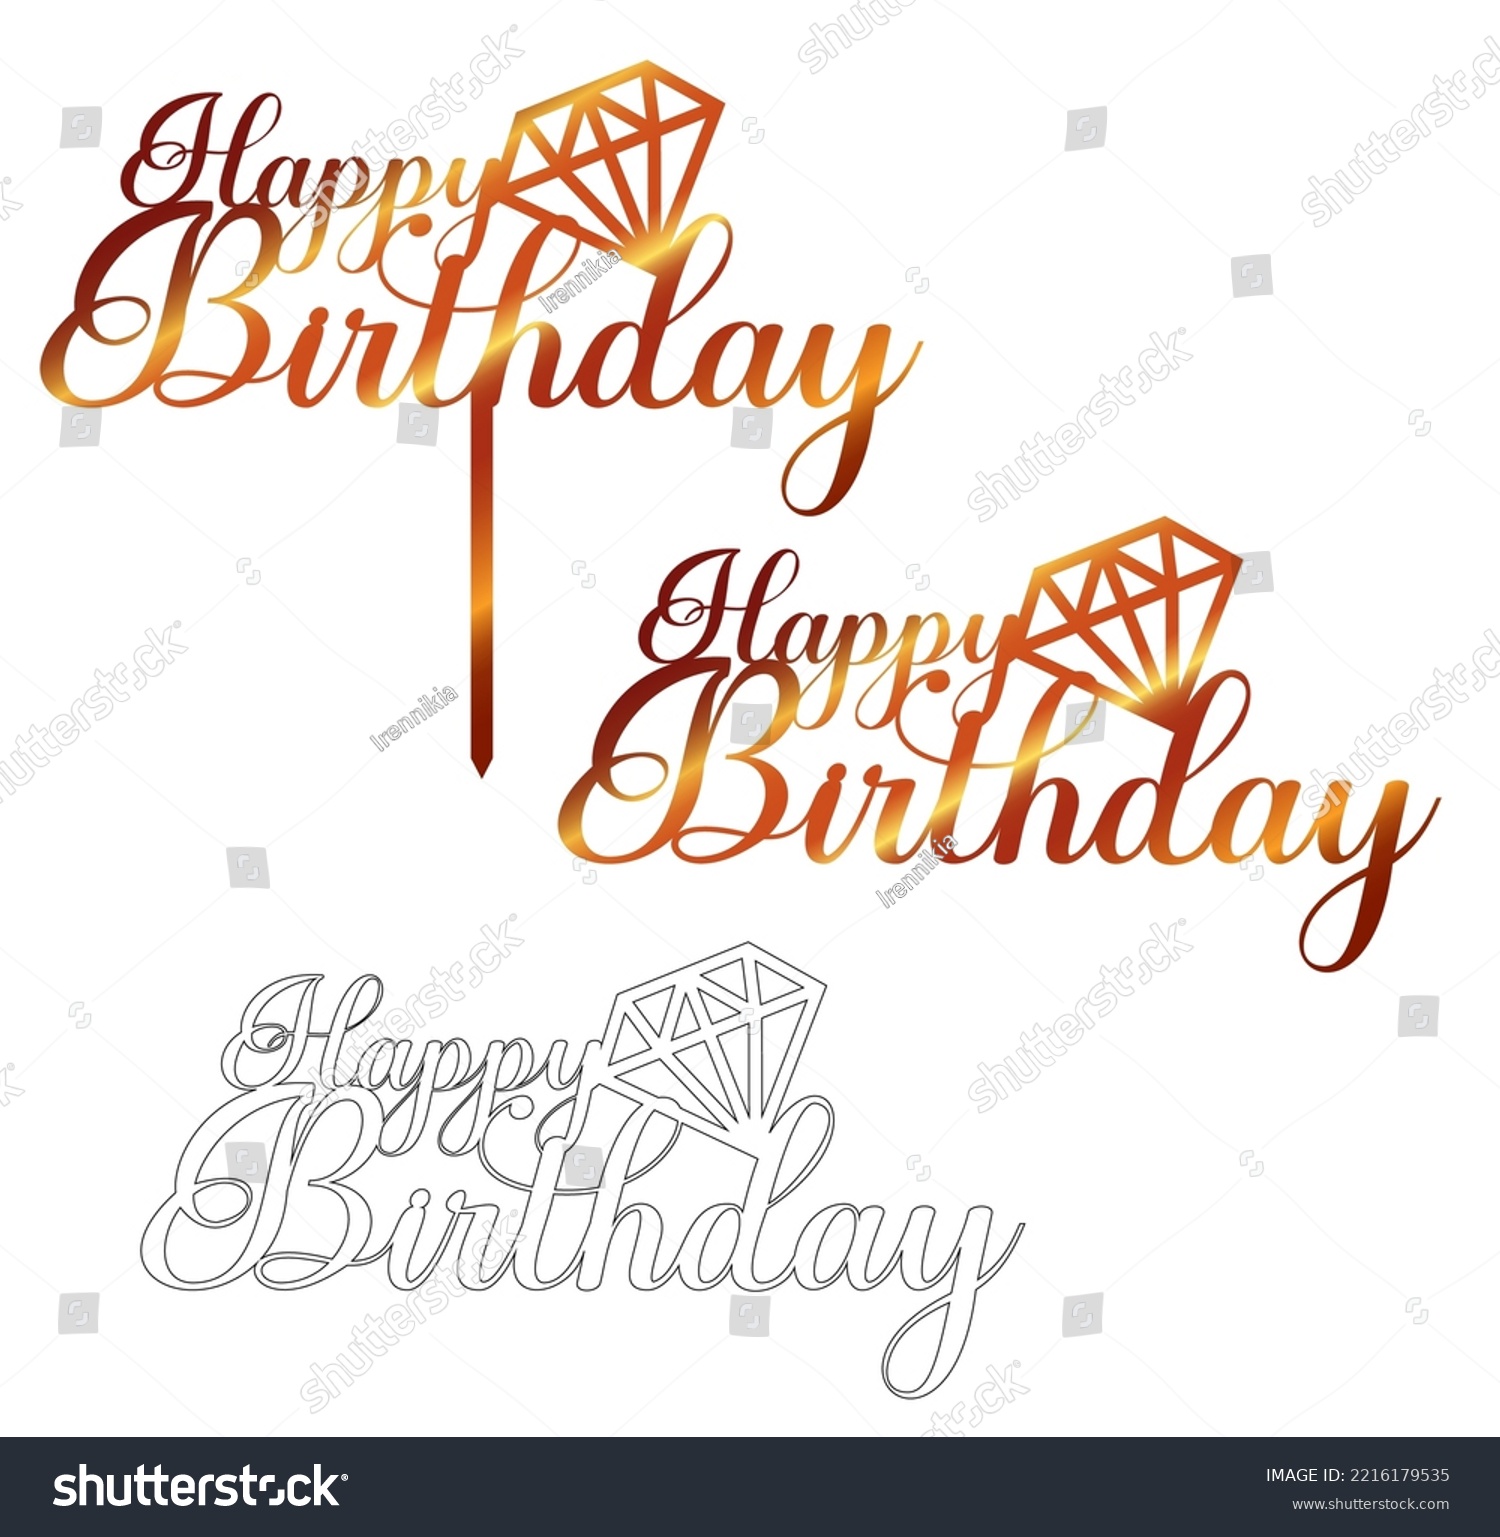 SVG of Happy birthday cake topper with a diamond.  Sign for laser cutting svg